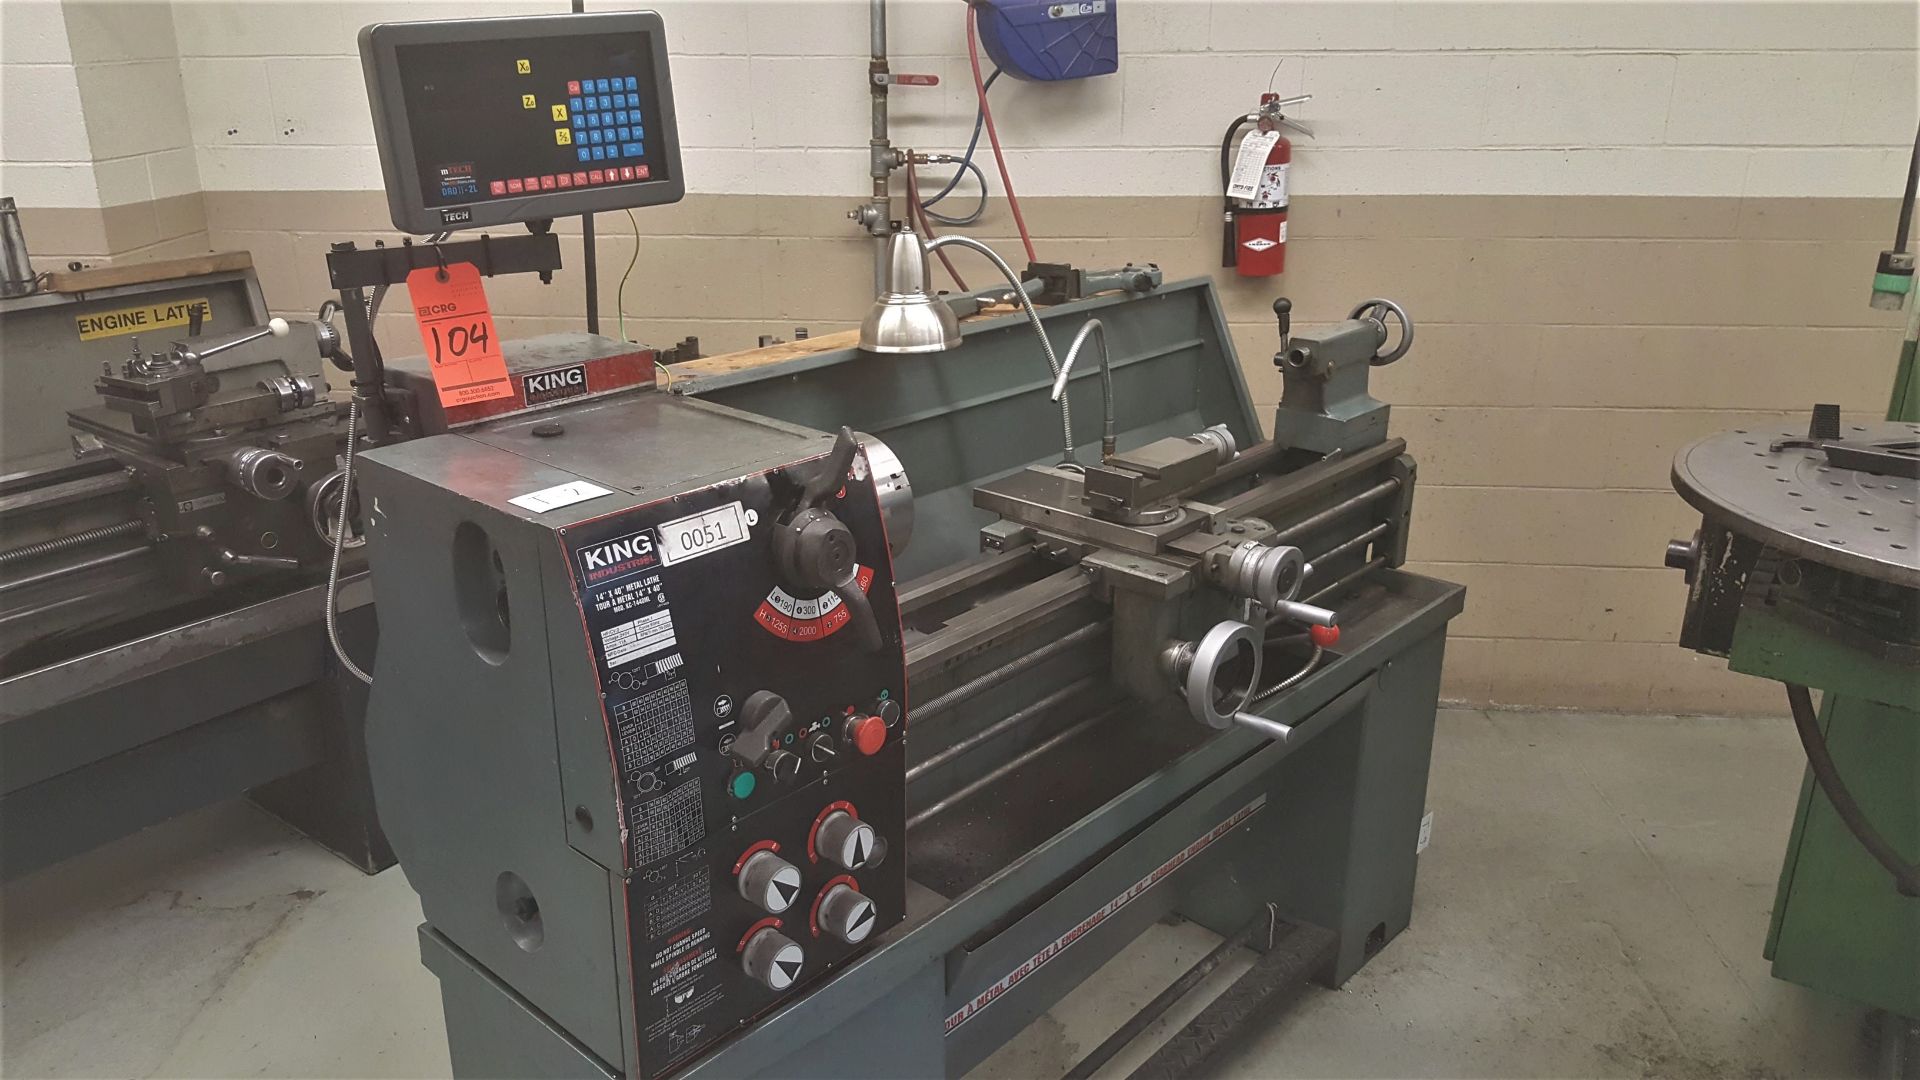 2010 KING 1440 engine lathe, 14" swing X 40" between centers, 70 - 2,00 RPM spindle speeds, inch/